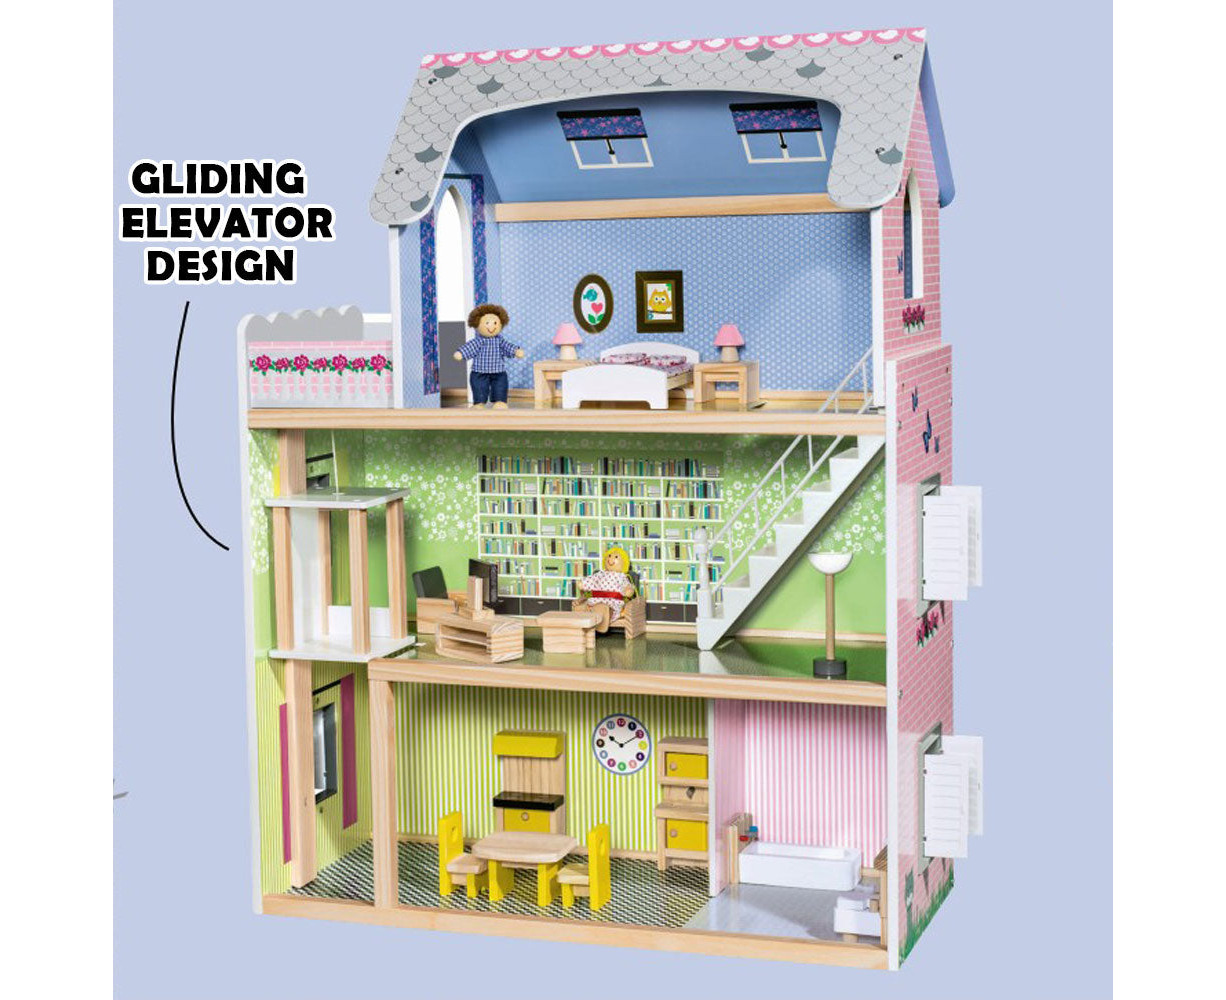 UNBOXING PLAYTIVE JUNIOR DOLL'S HOUSE WITH 3 LEVELS LIGHTS & ELEVATOR 